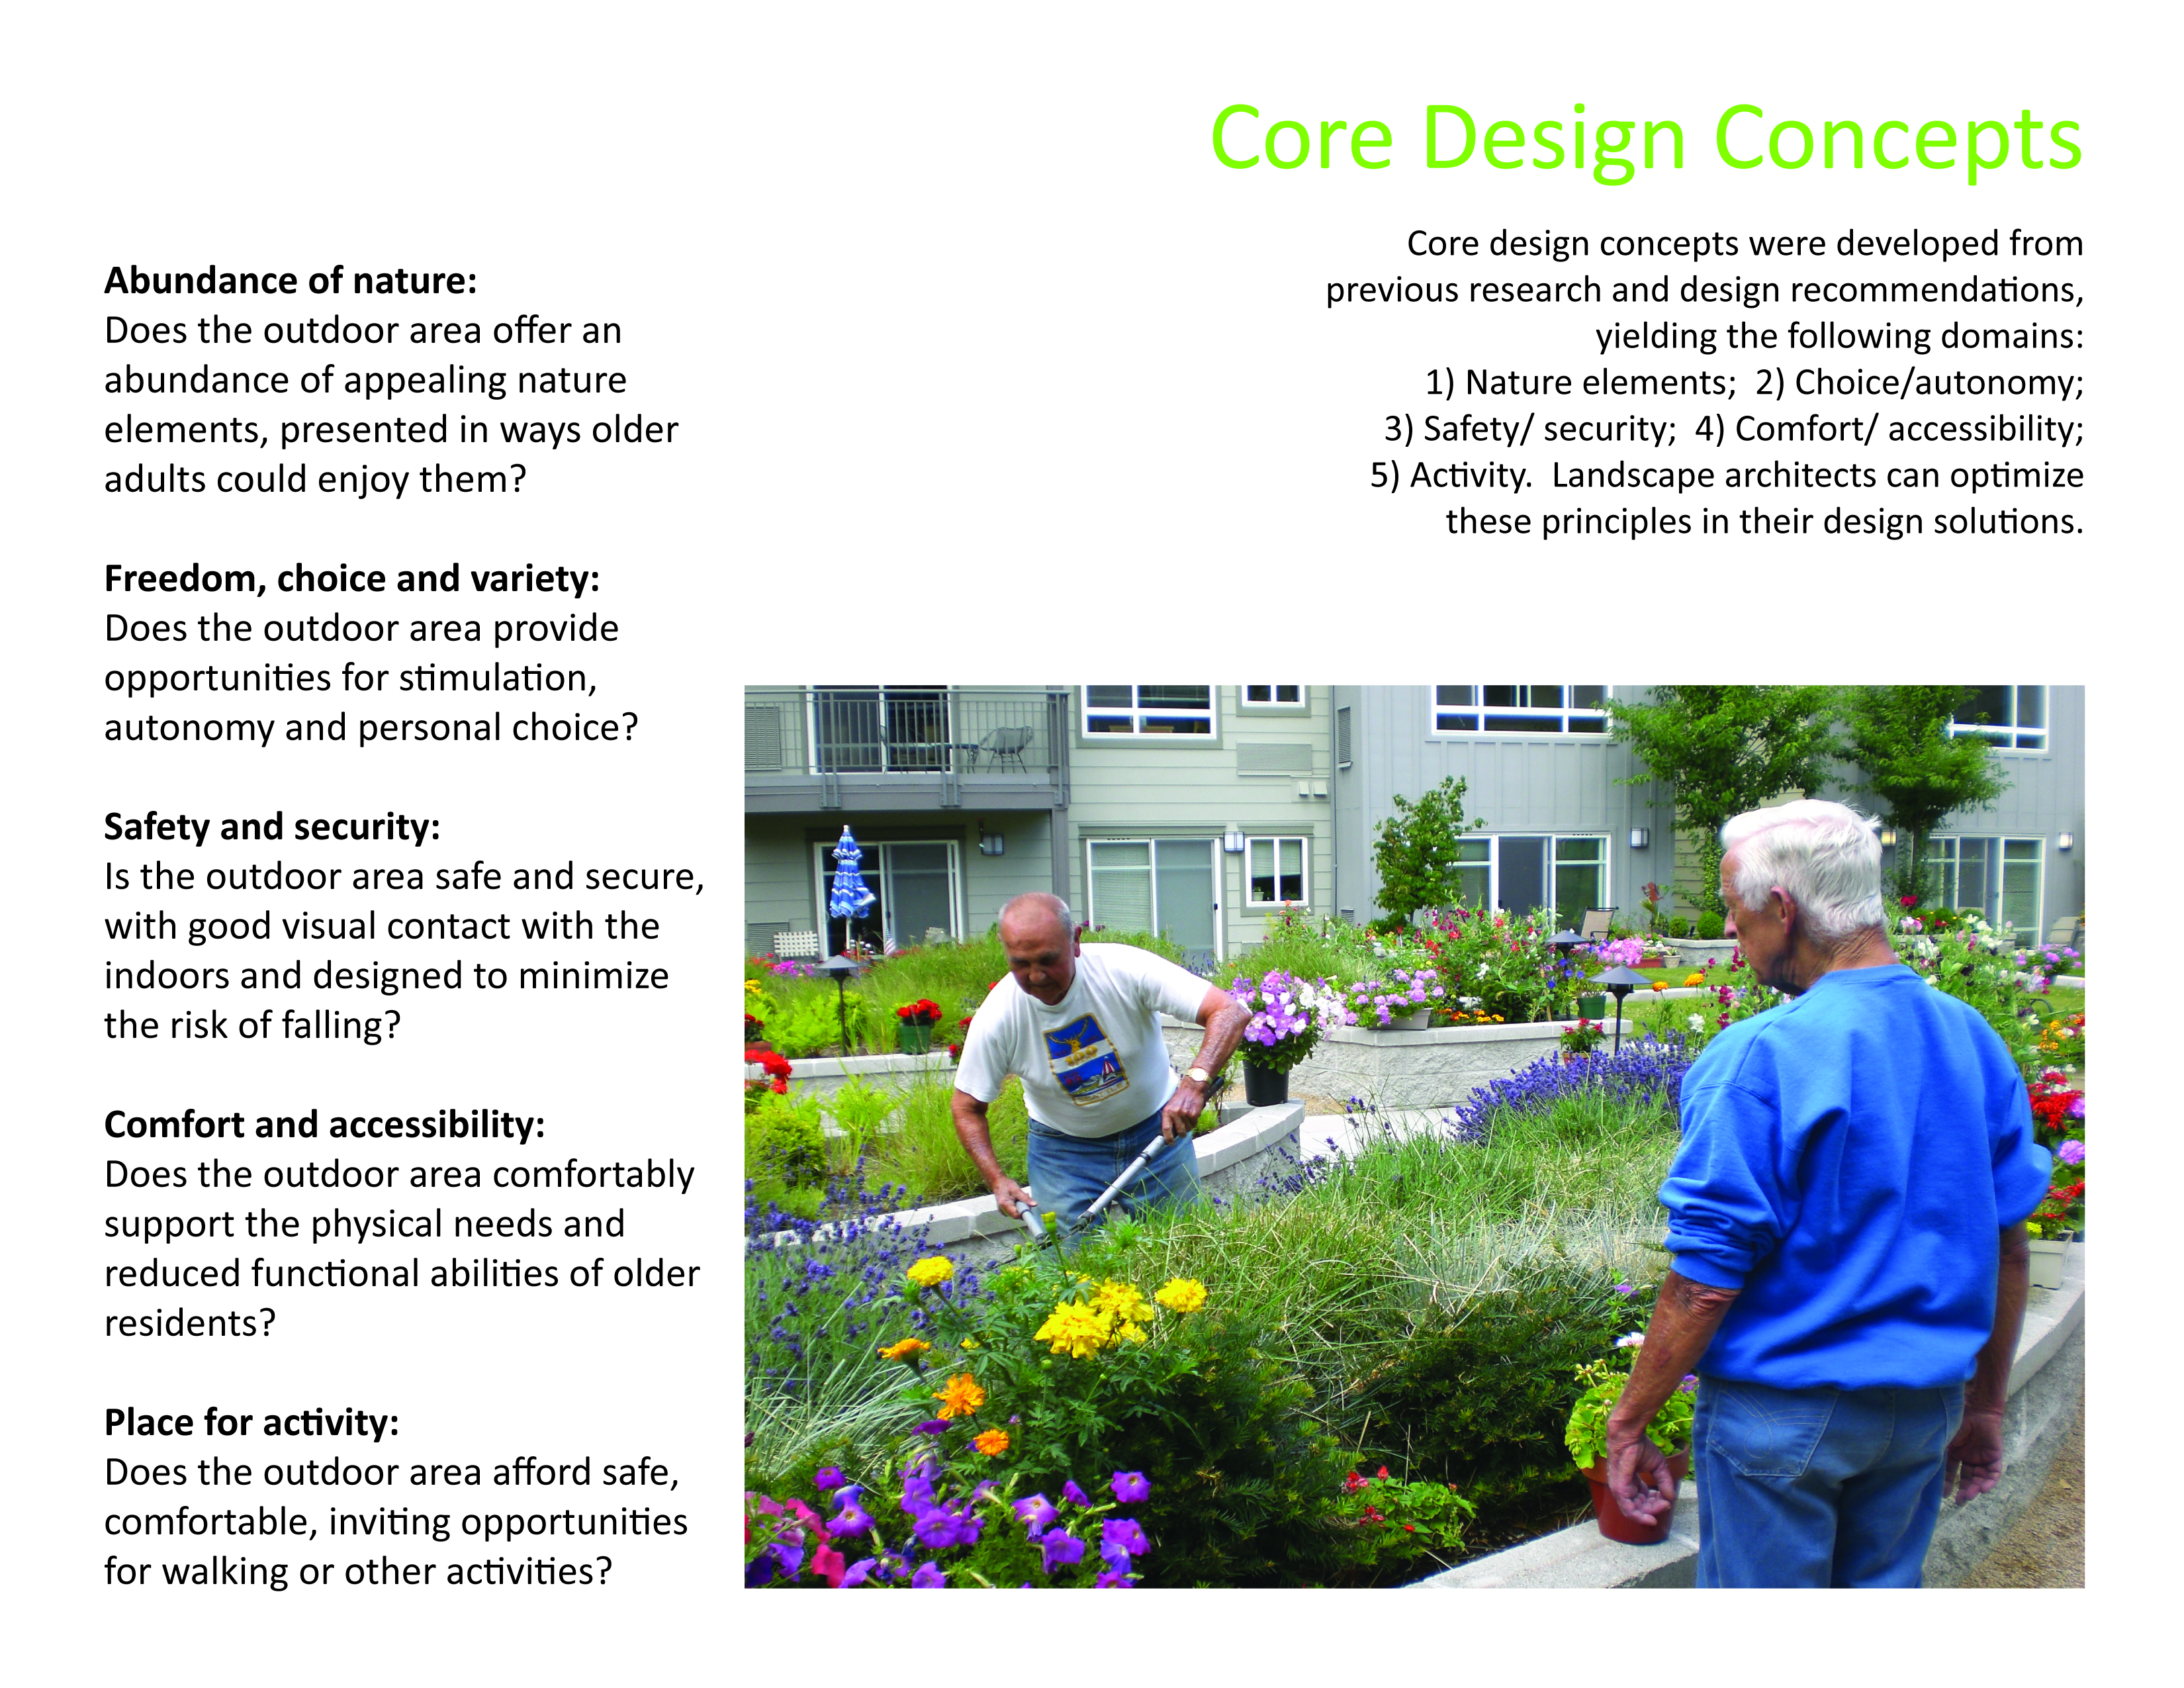 ... to Nature for Older Adults: Promoting Health through Landscape Design